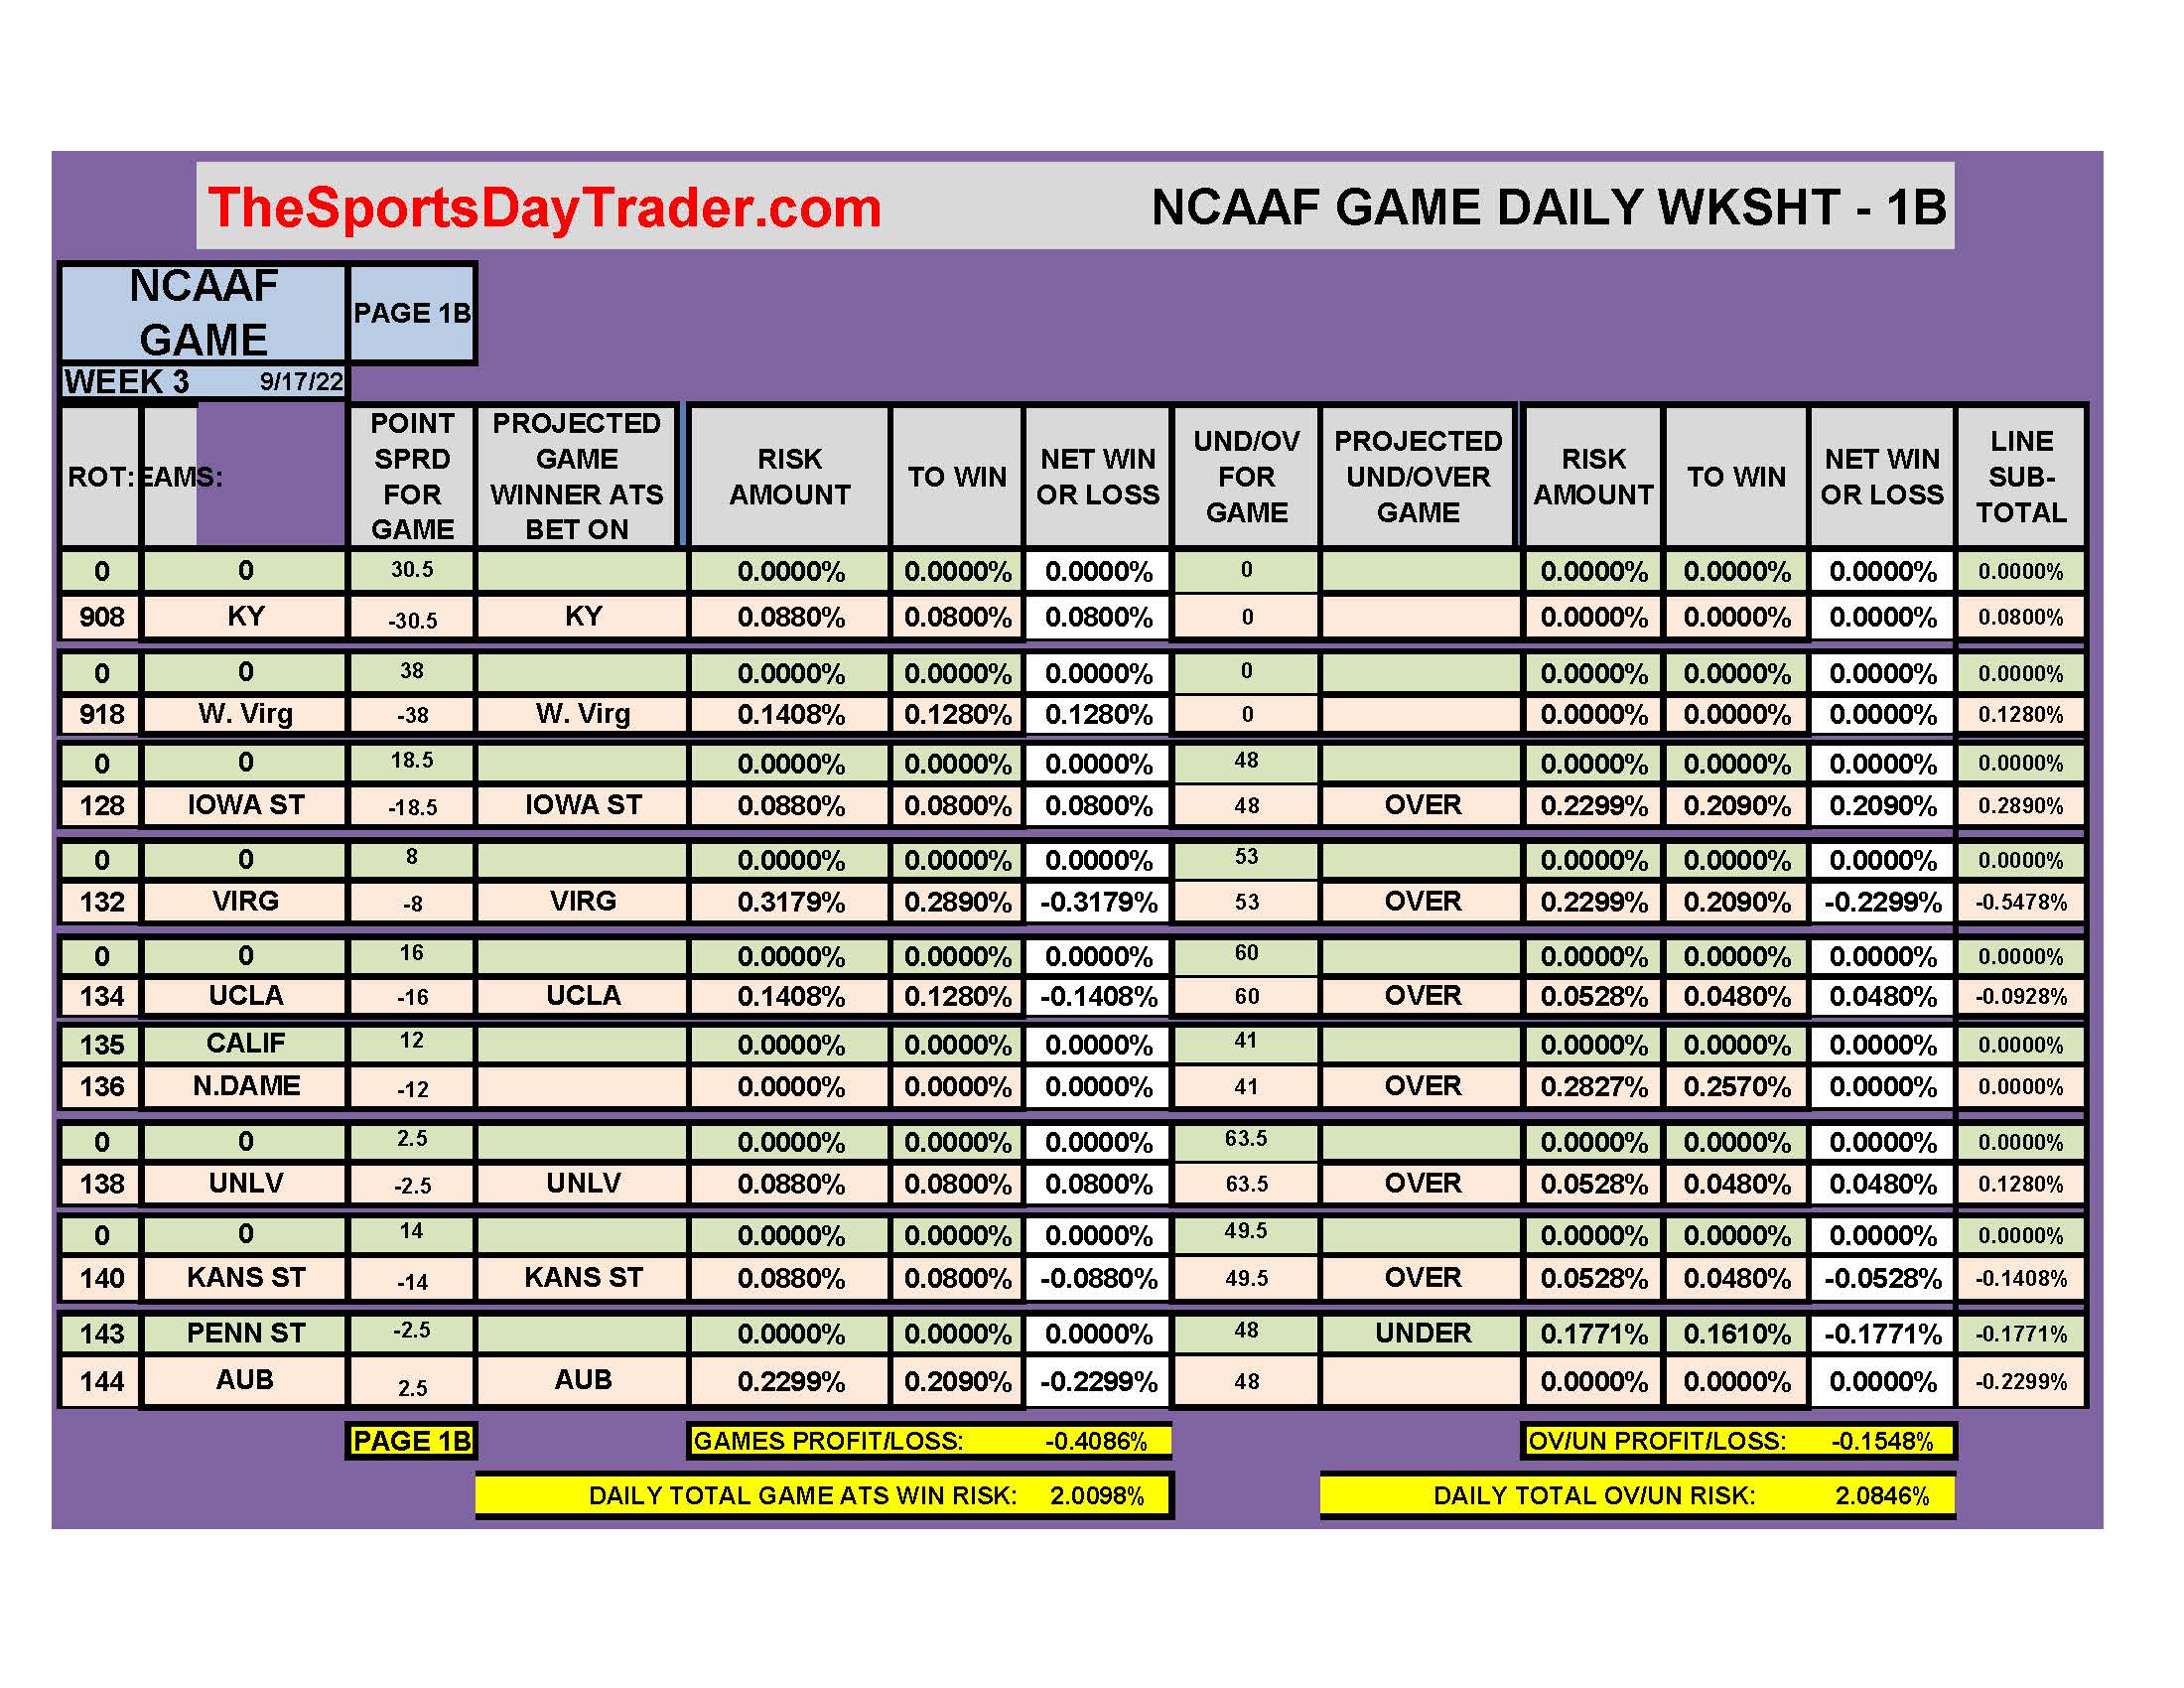 NCAAF 9/17/22 GAME DAILY RESULTS page 1B